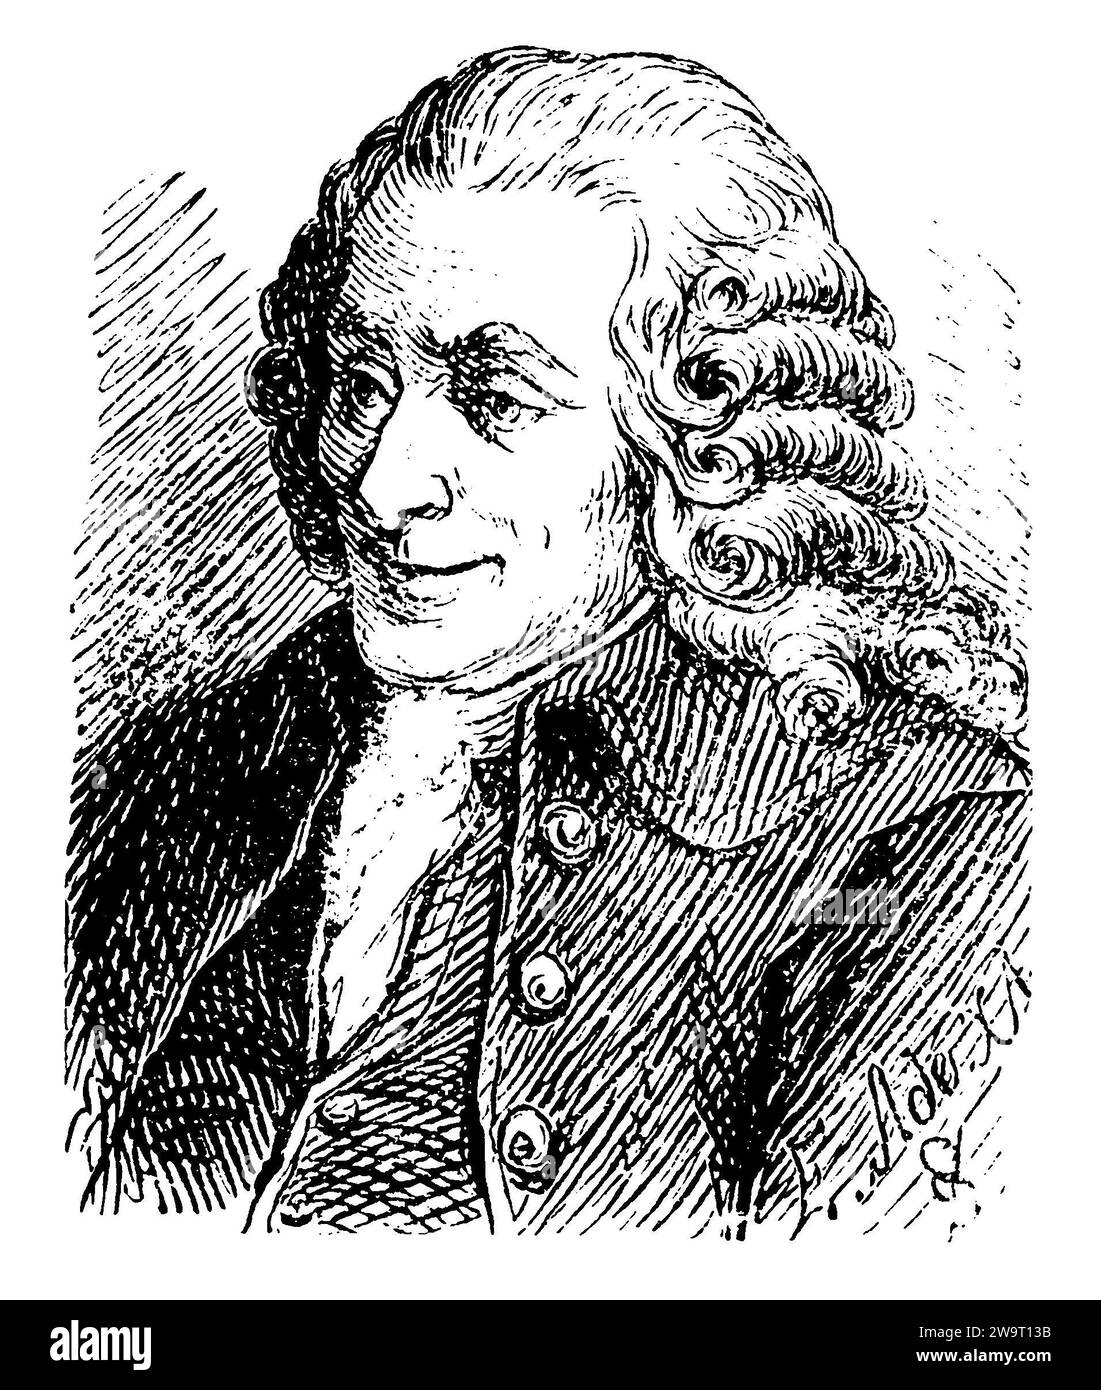 Voltaire (1694-1778), French writer, dramatist, philosopher and ...